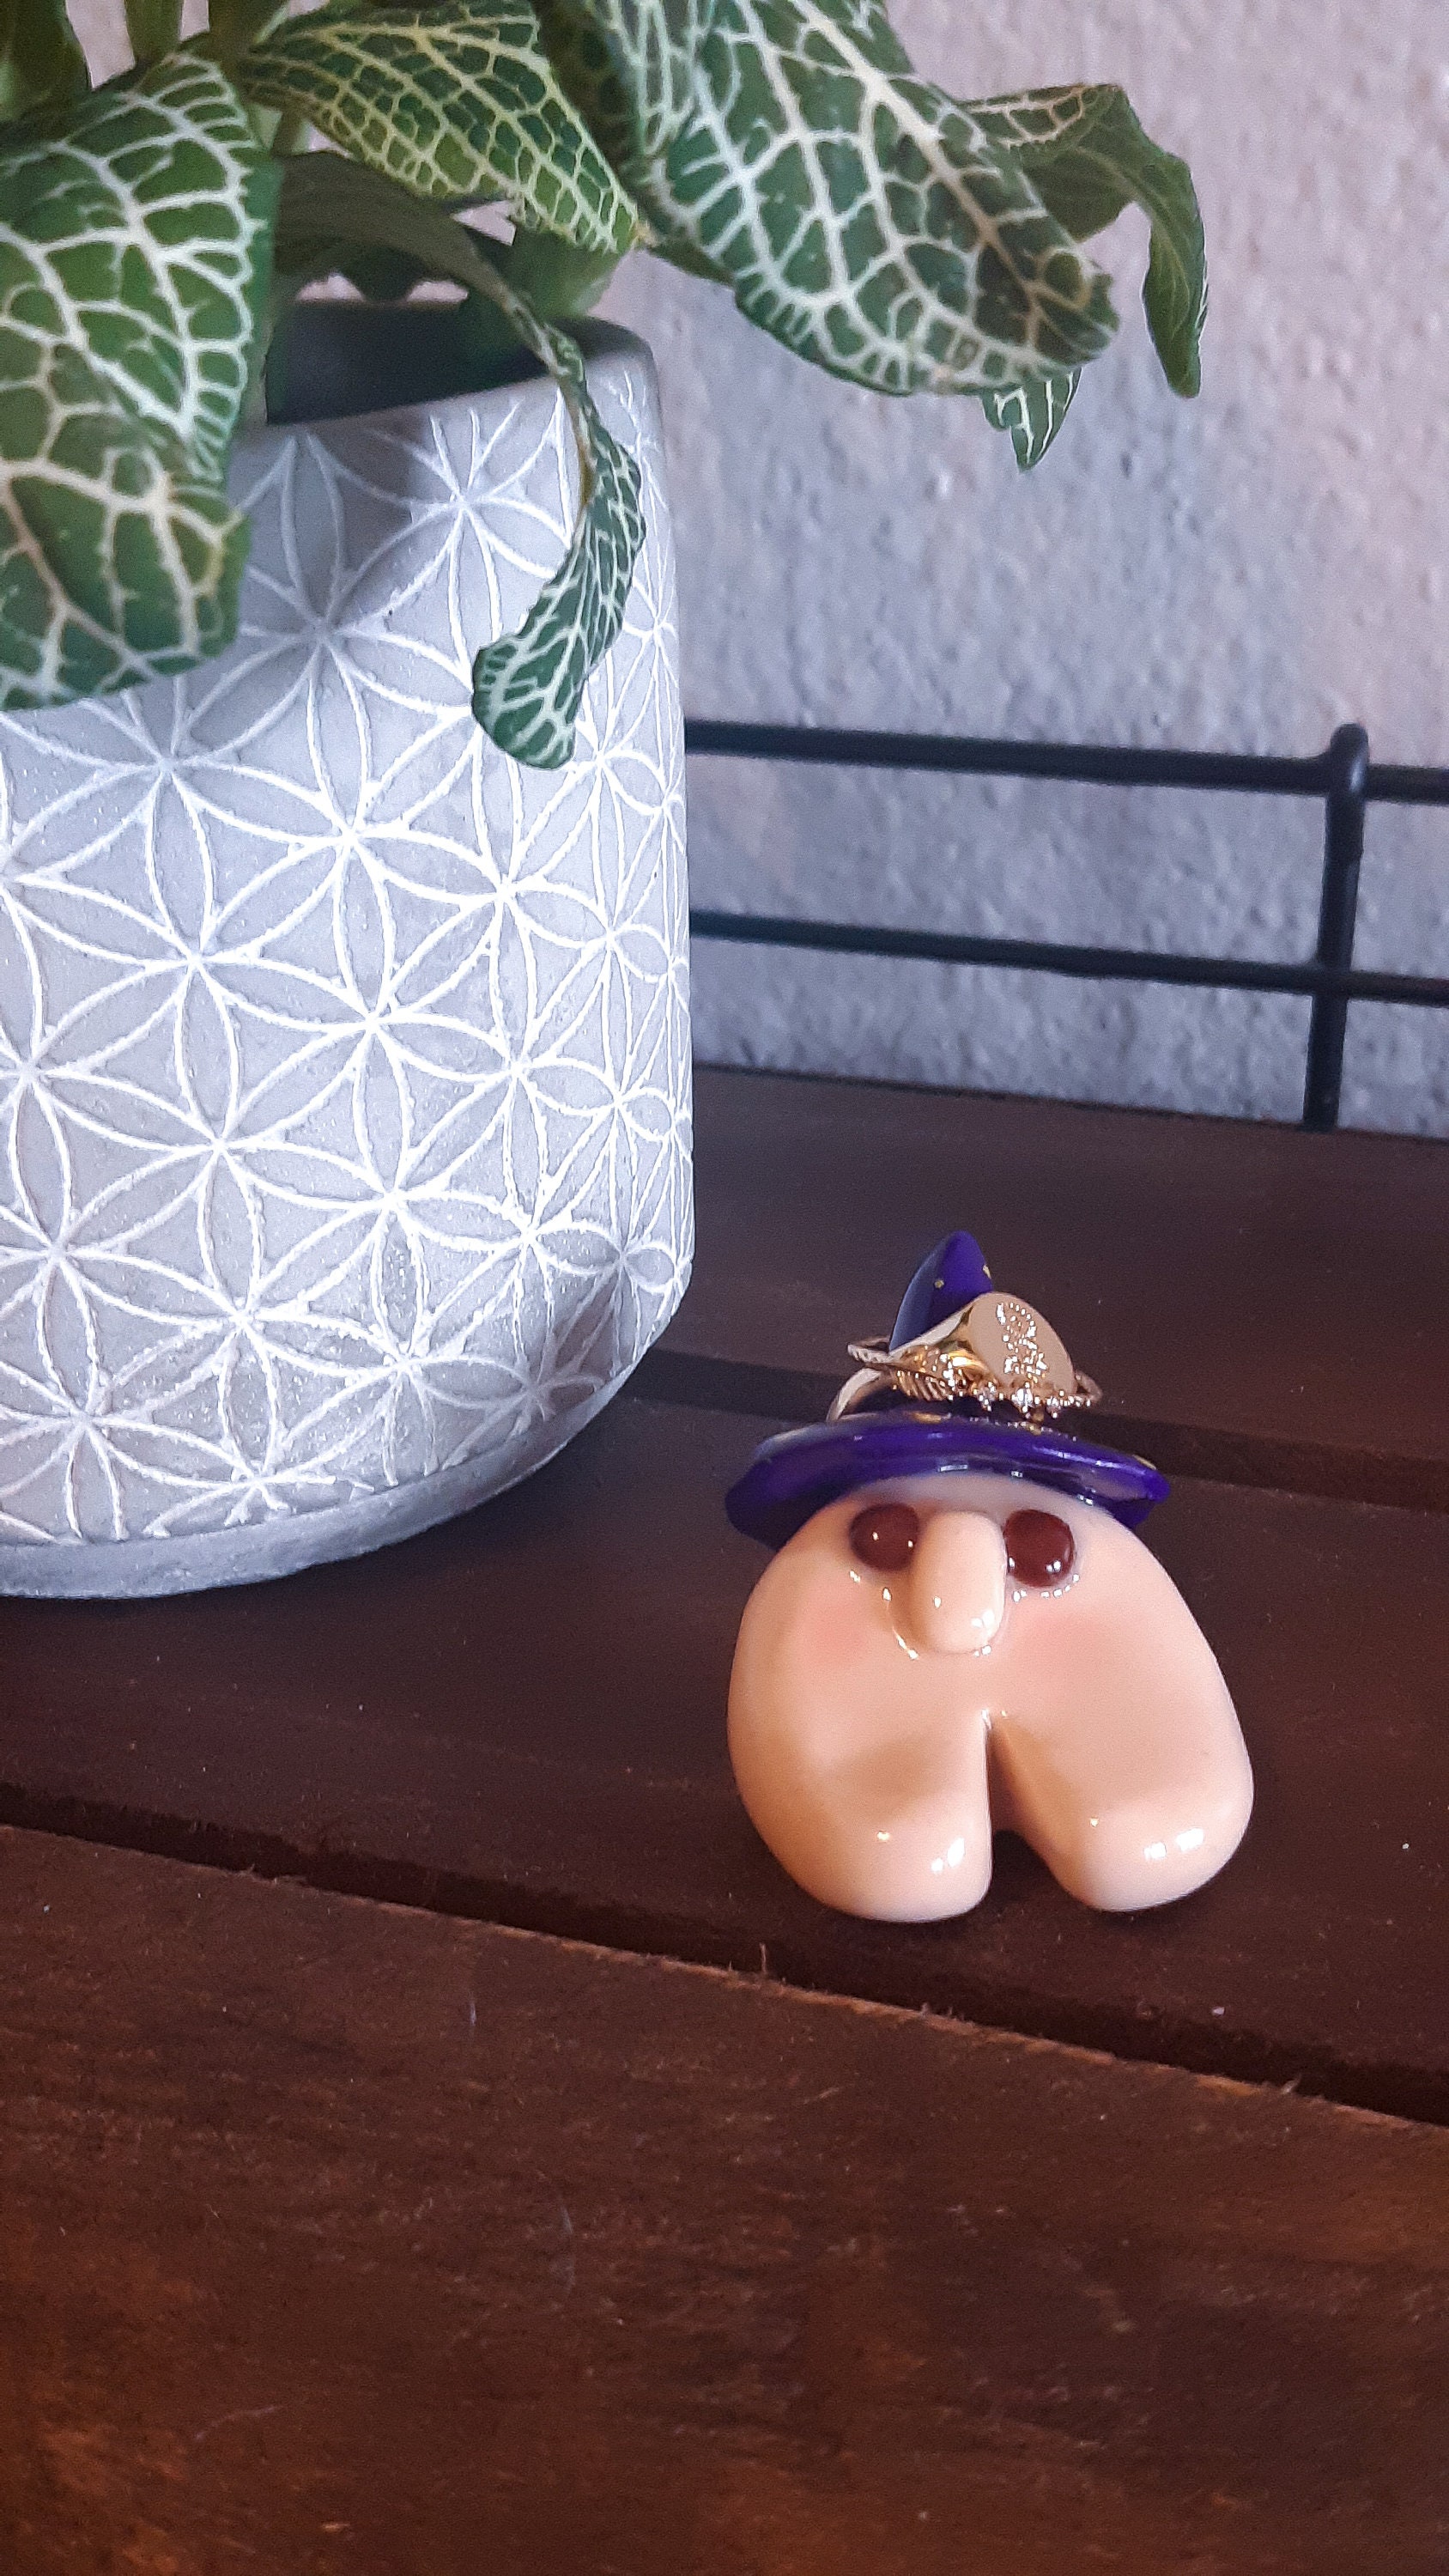 Chicken Nugget and Fries Desk Buddy! Made for our shop! : r/polymerclay